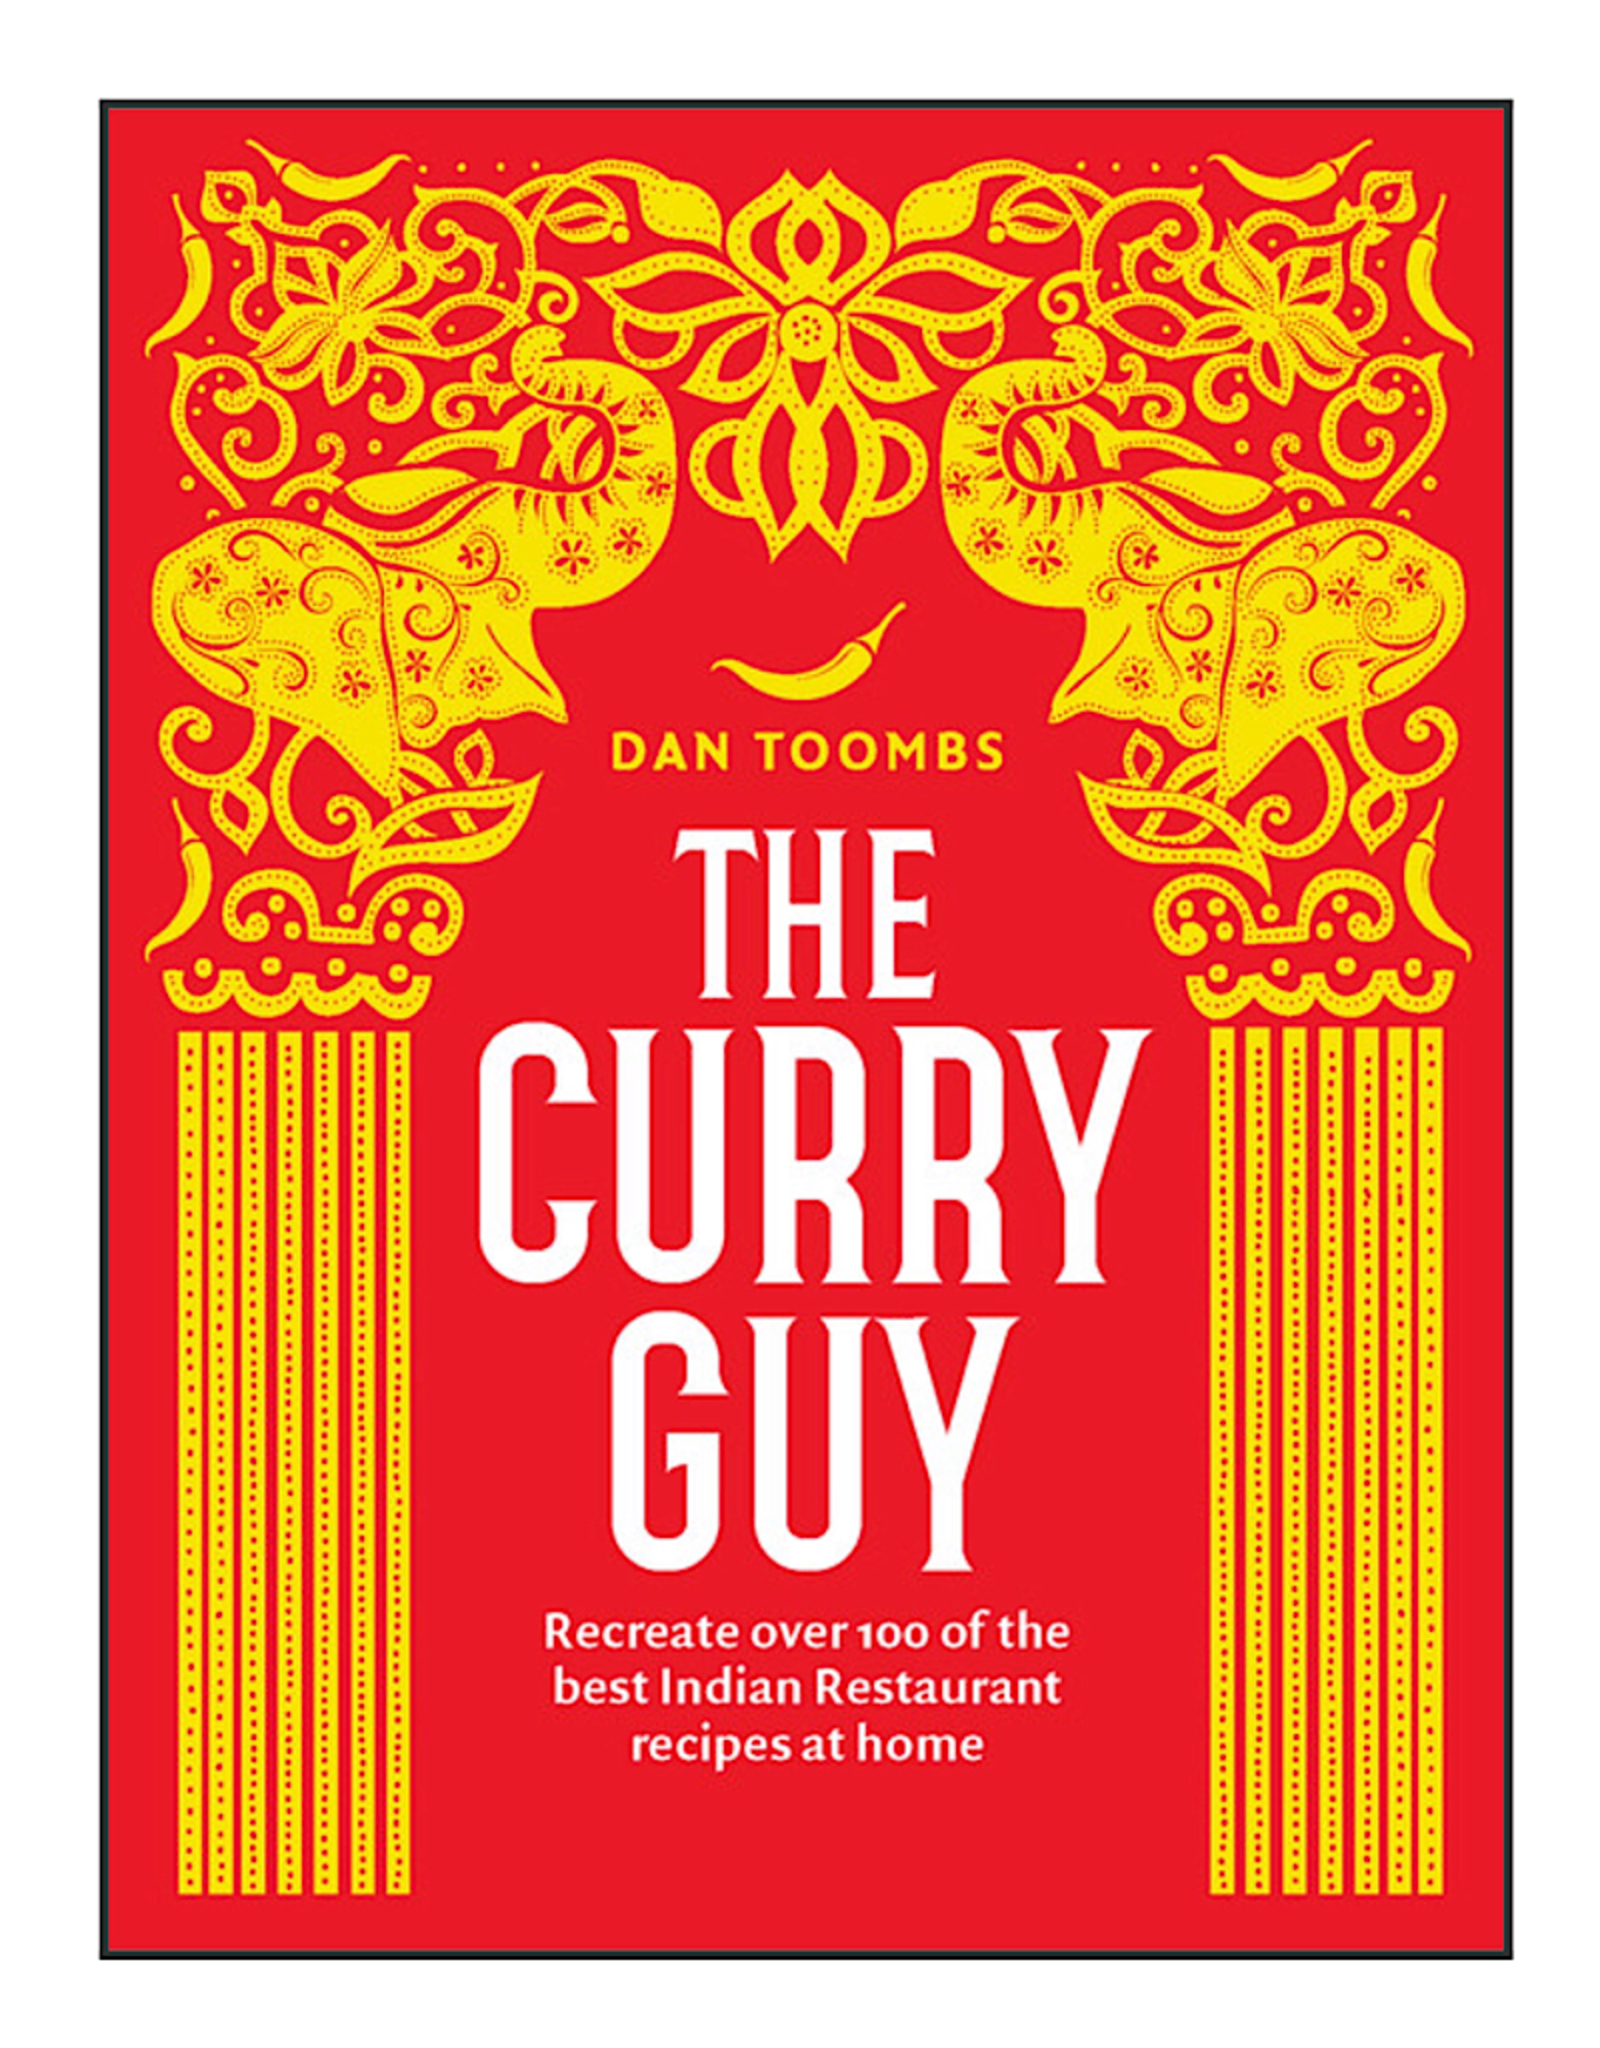 Cookbook The Curry Guy